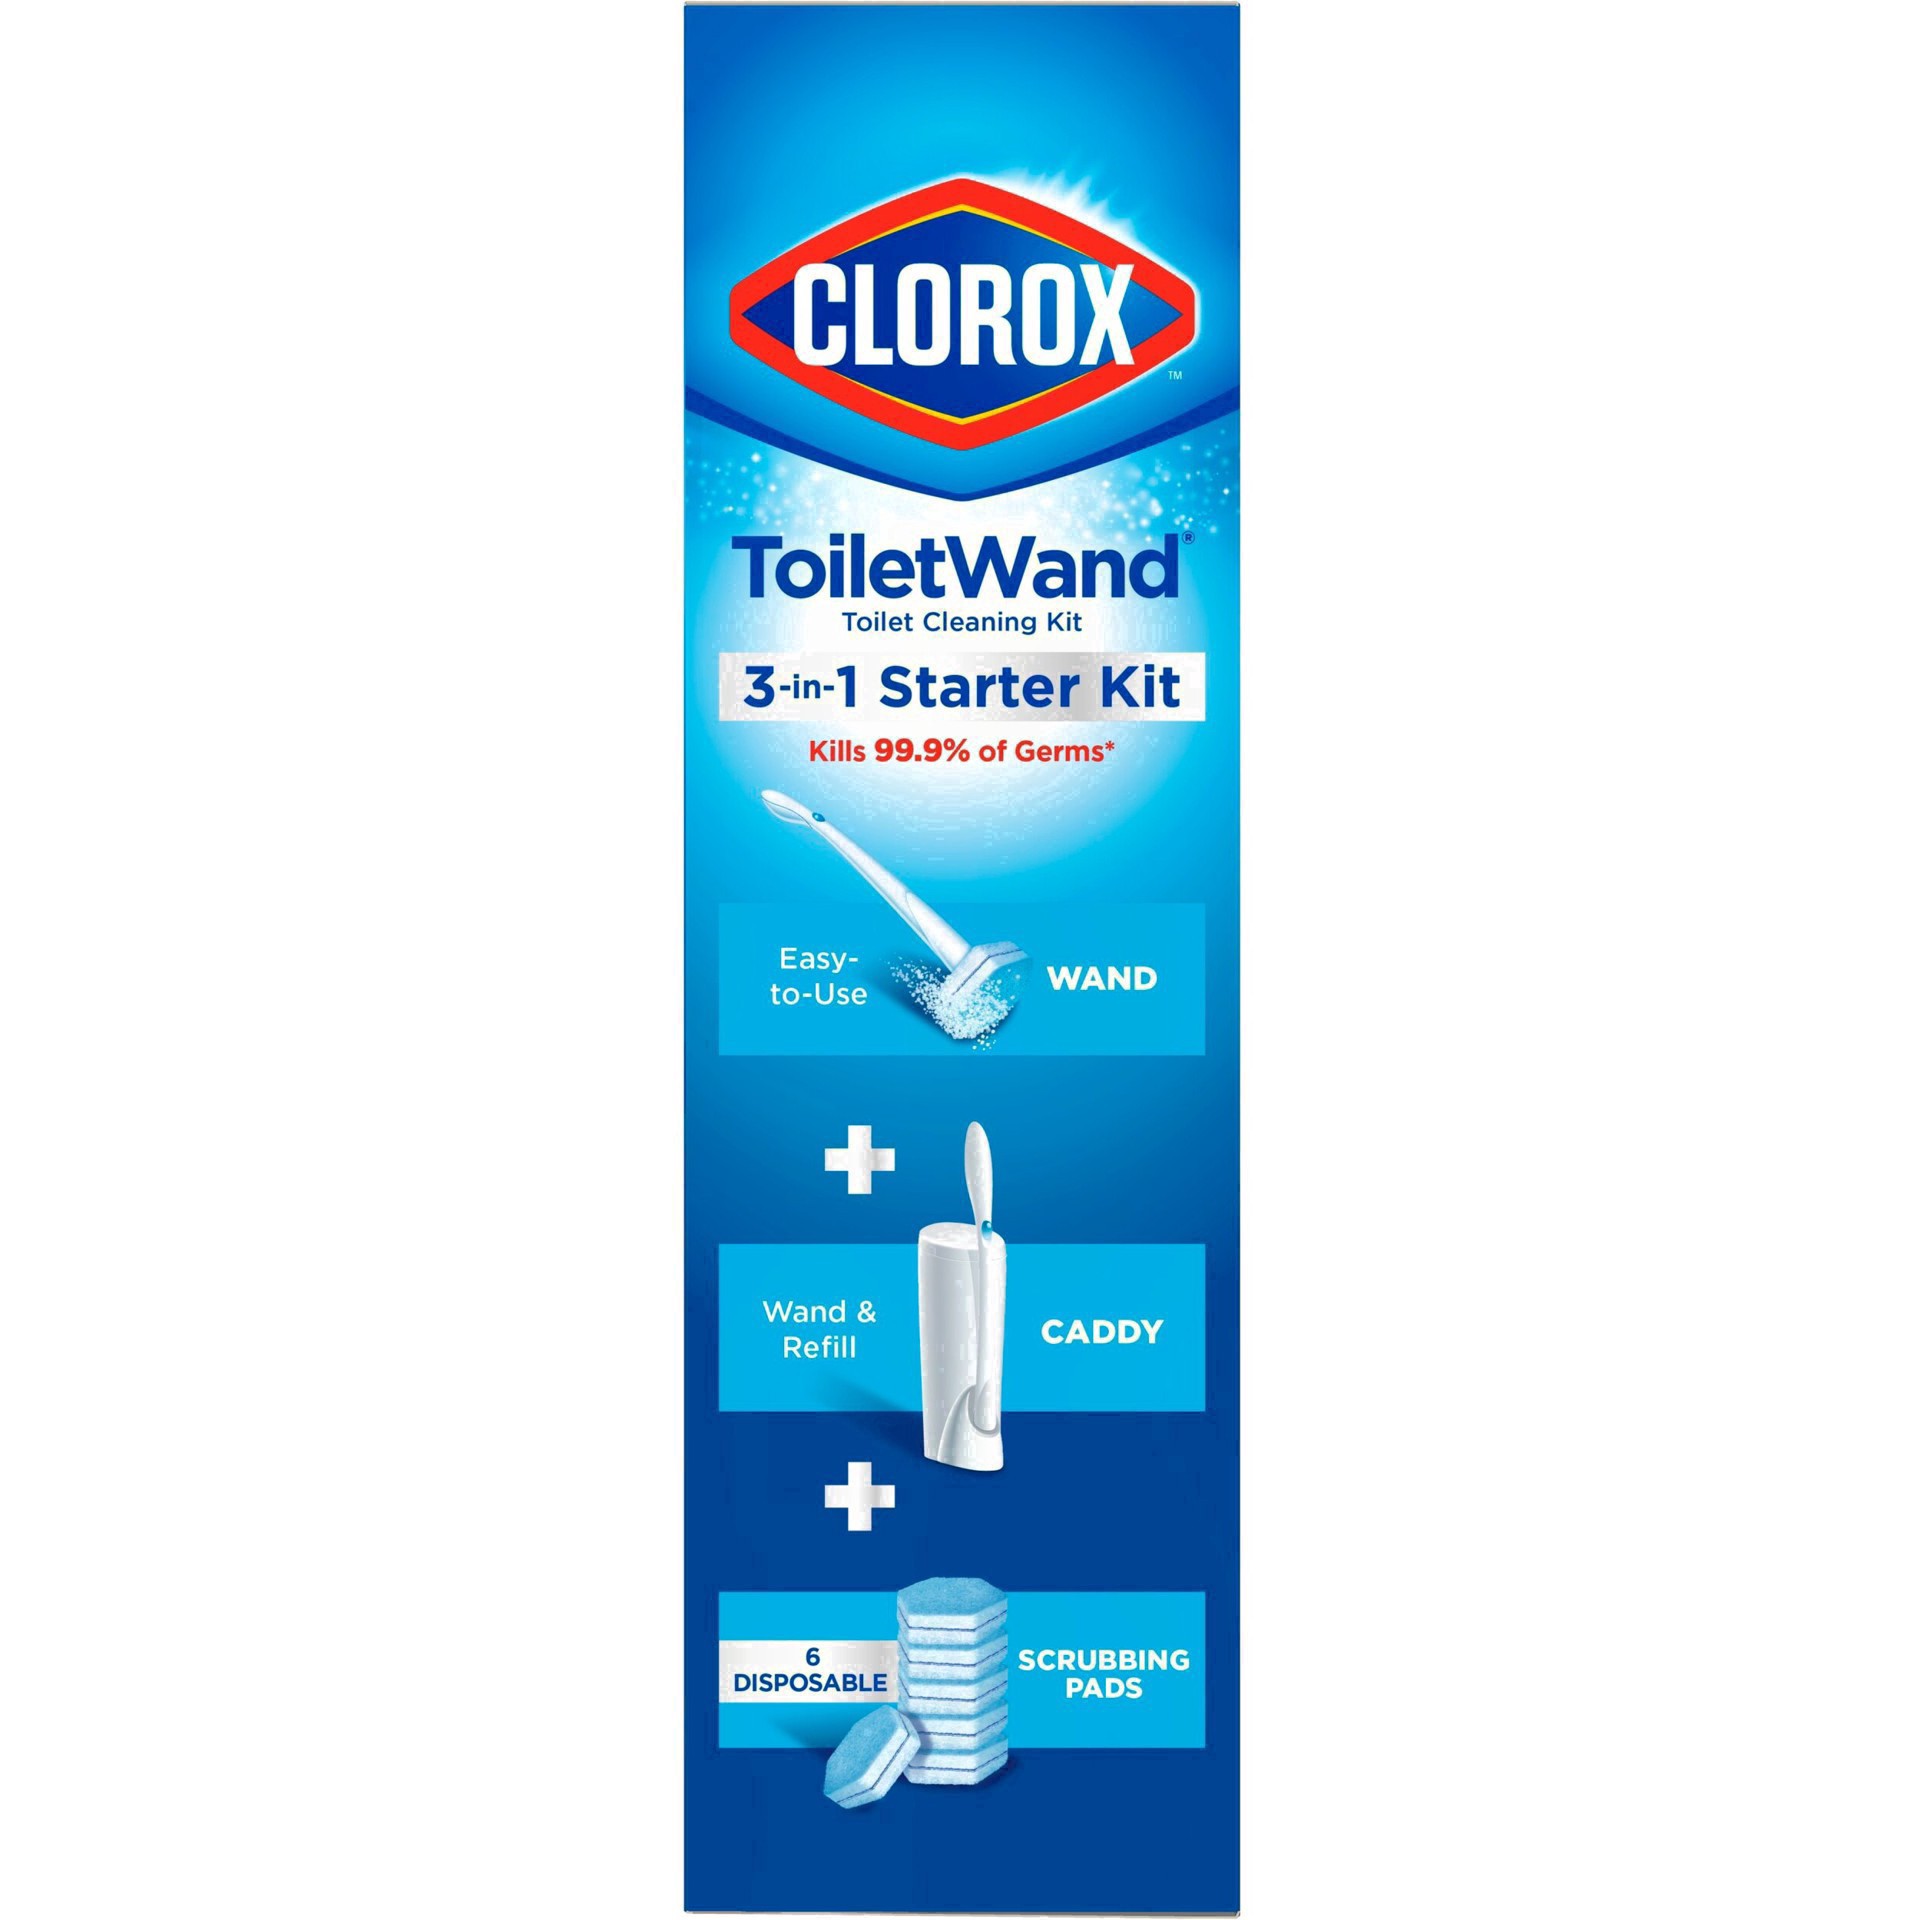 slide 145 of 176, Clorox Toilet Wand 3-in-1 Starter Toliet Cleaning Kit, 1 ct